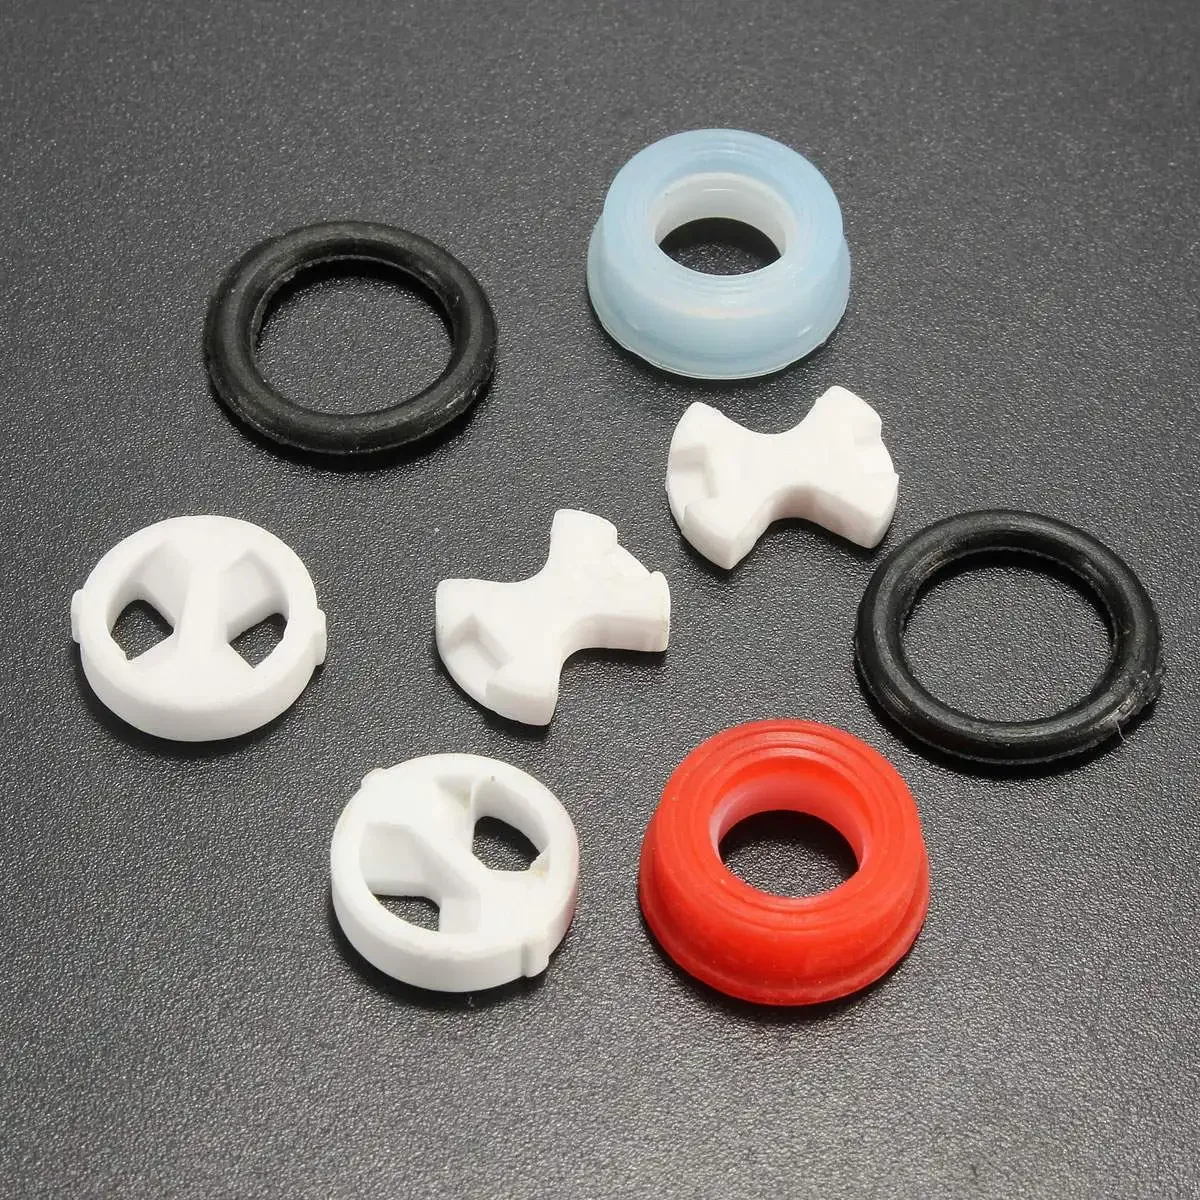 

8Pcs 1/2" Ceramic Disc Silicon Washer Insert Turn Replacement For Valve Tap Kitchen Faucet Accessories